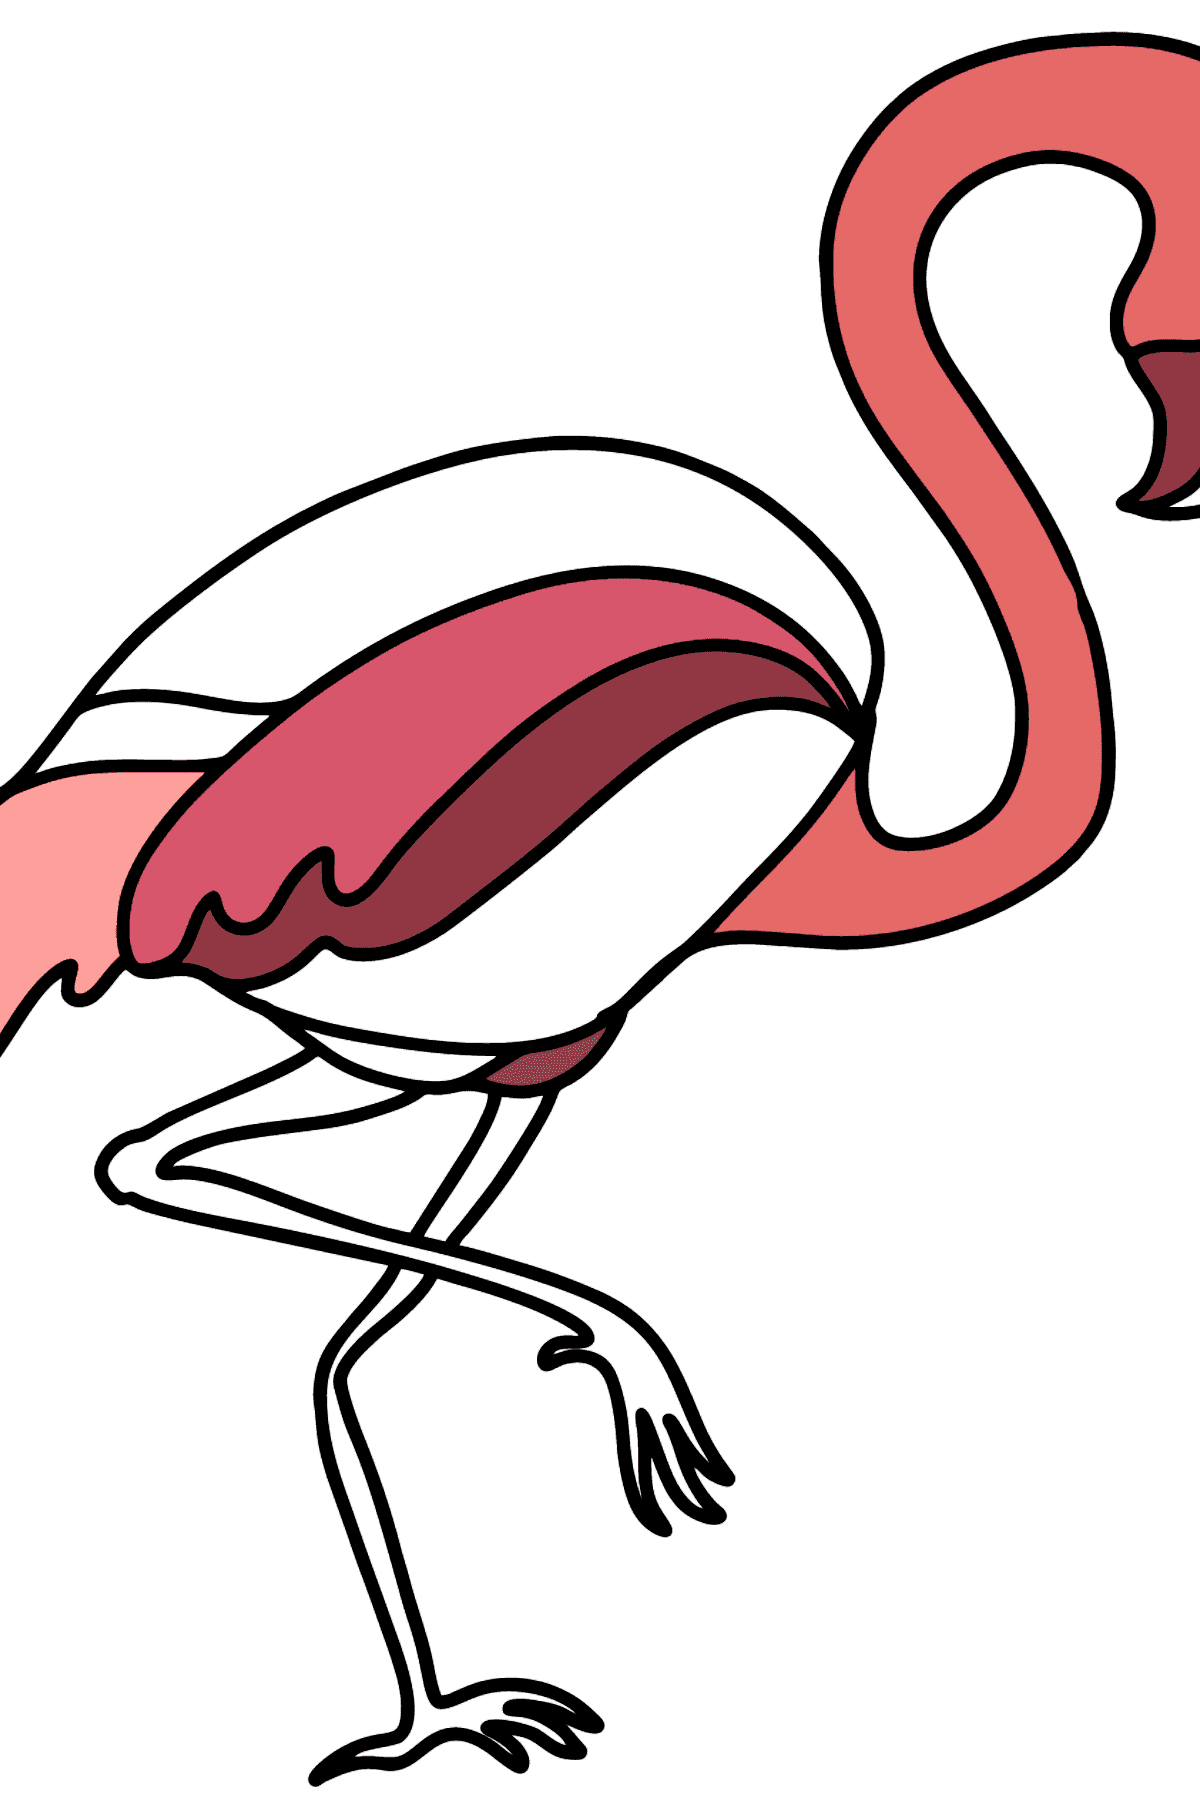 Flamingo coloring page - Coloring Pages for Kids